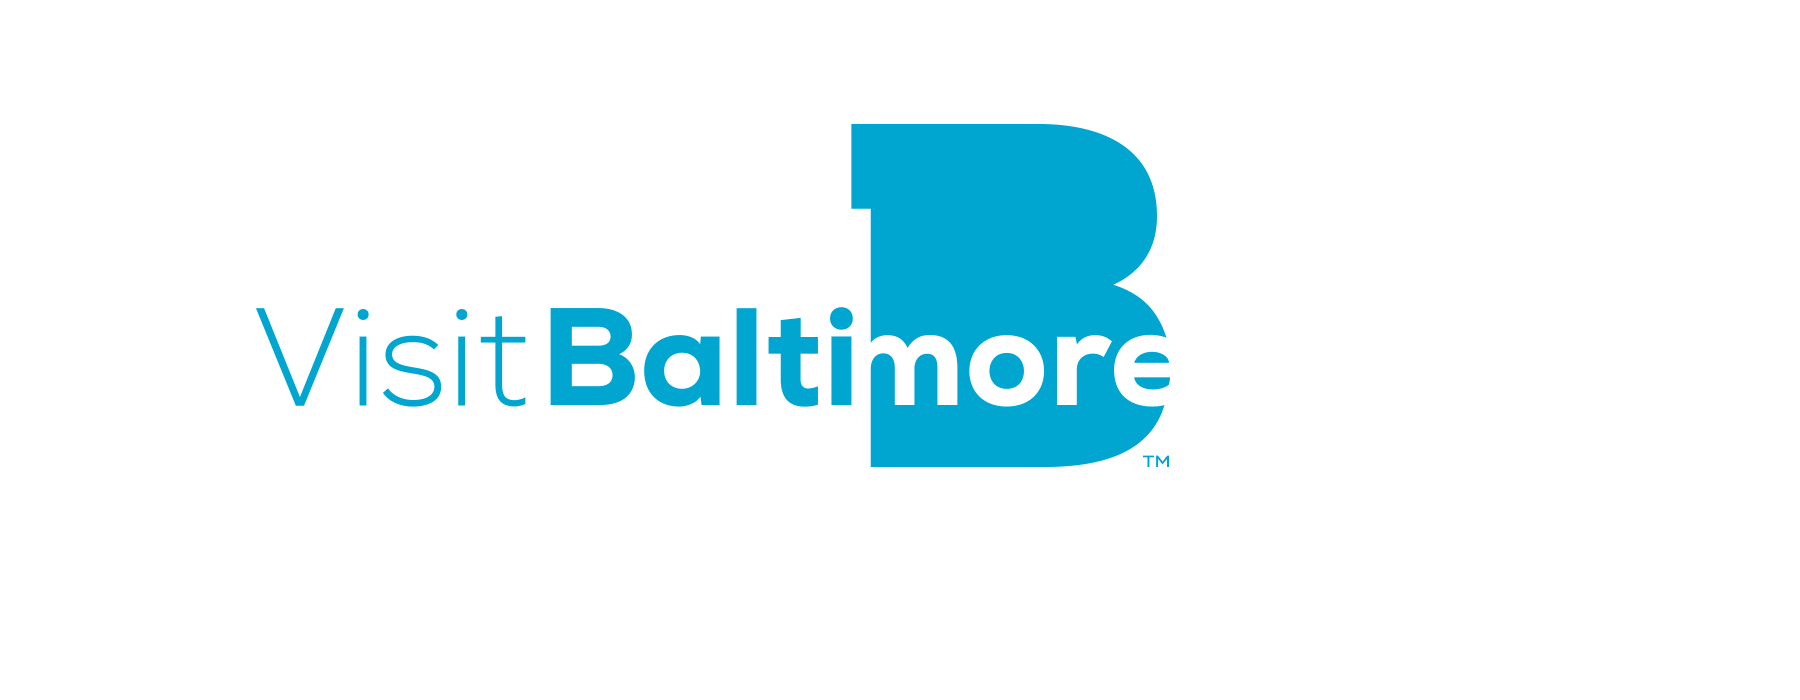 Baltimore Logo - Brand New: New Logo and Identity for Visit Baltimore by TBC